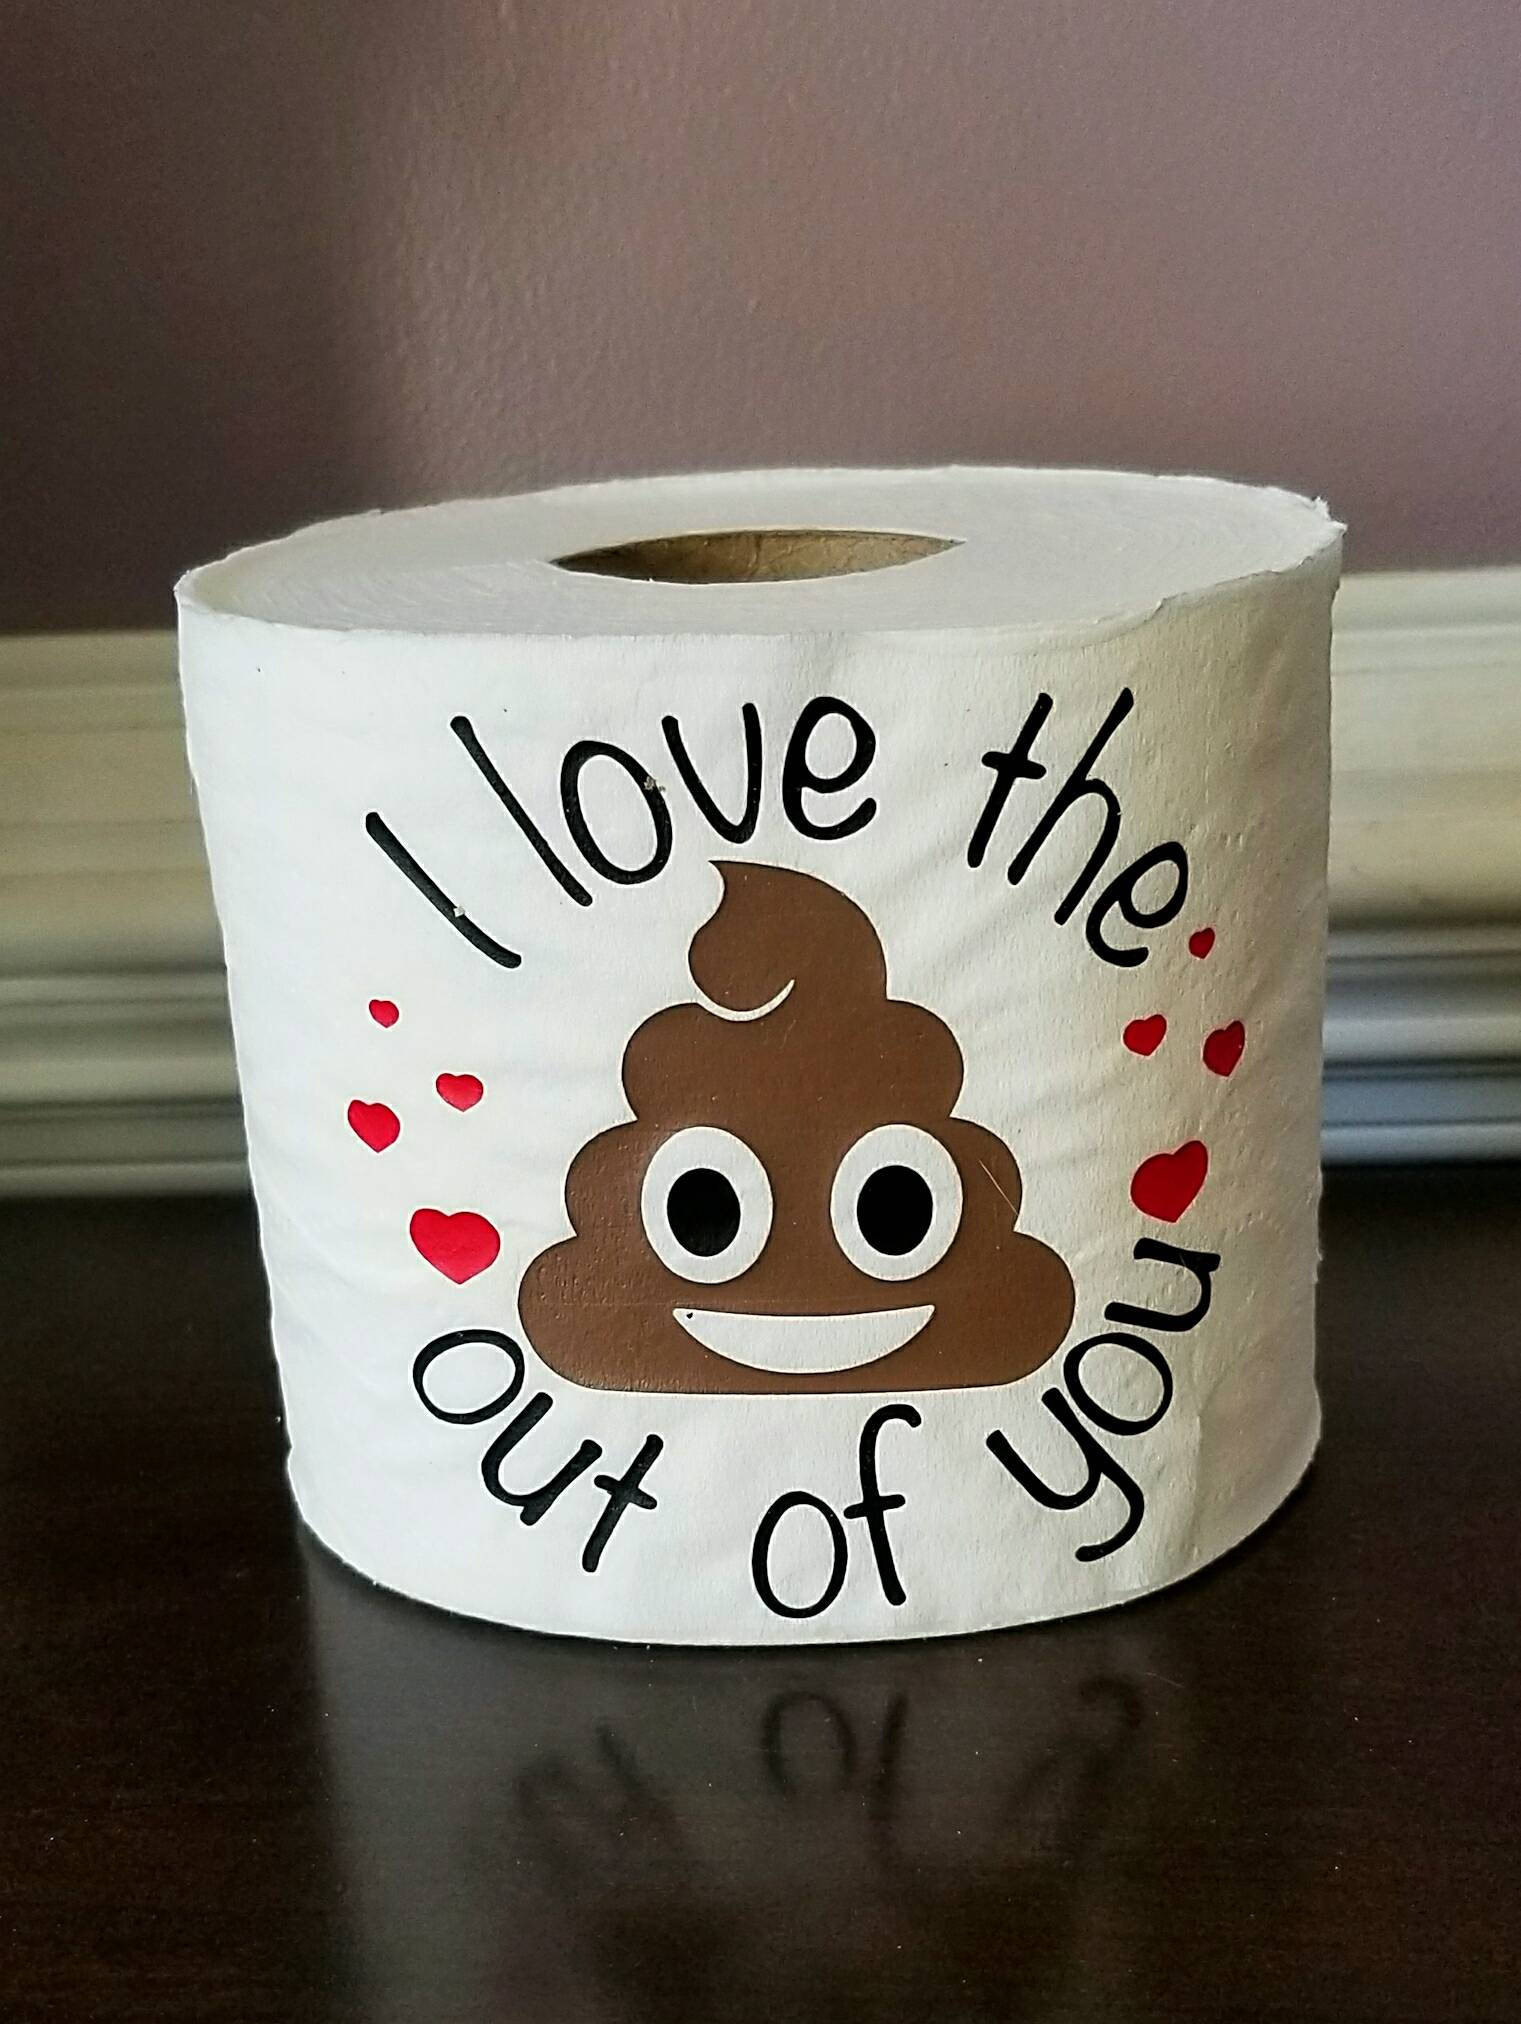 First Valentines Gift Ideas
 I love the poop out of you toilet paper poop toilet paper